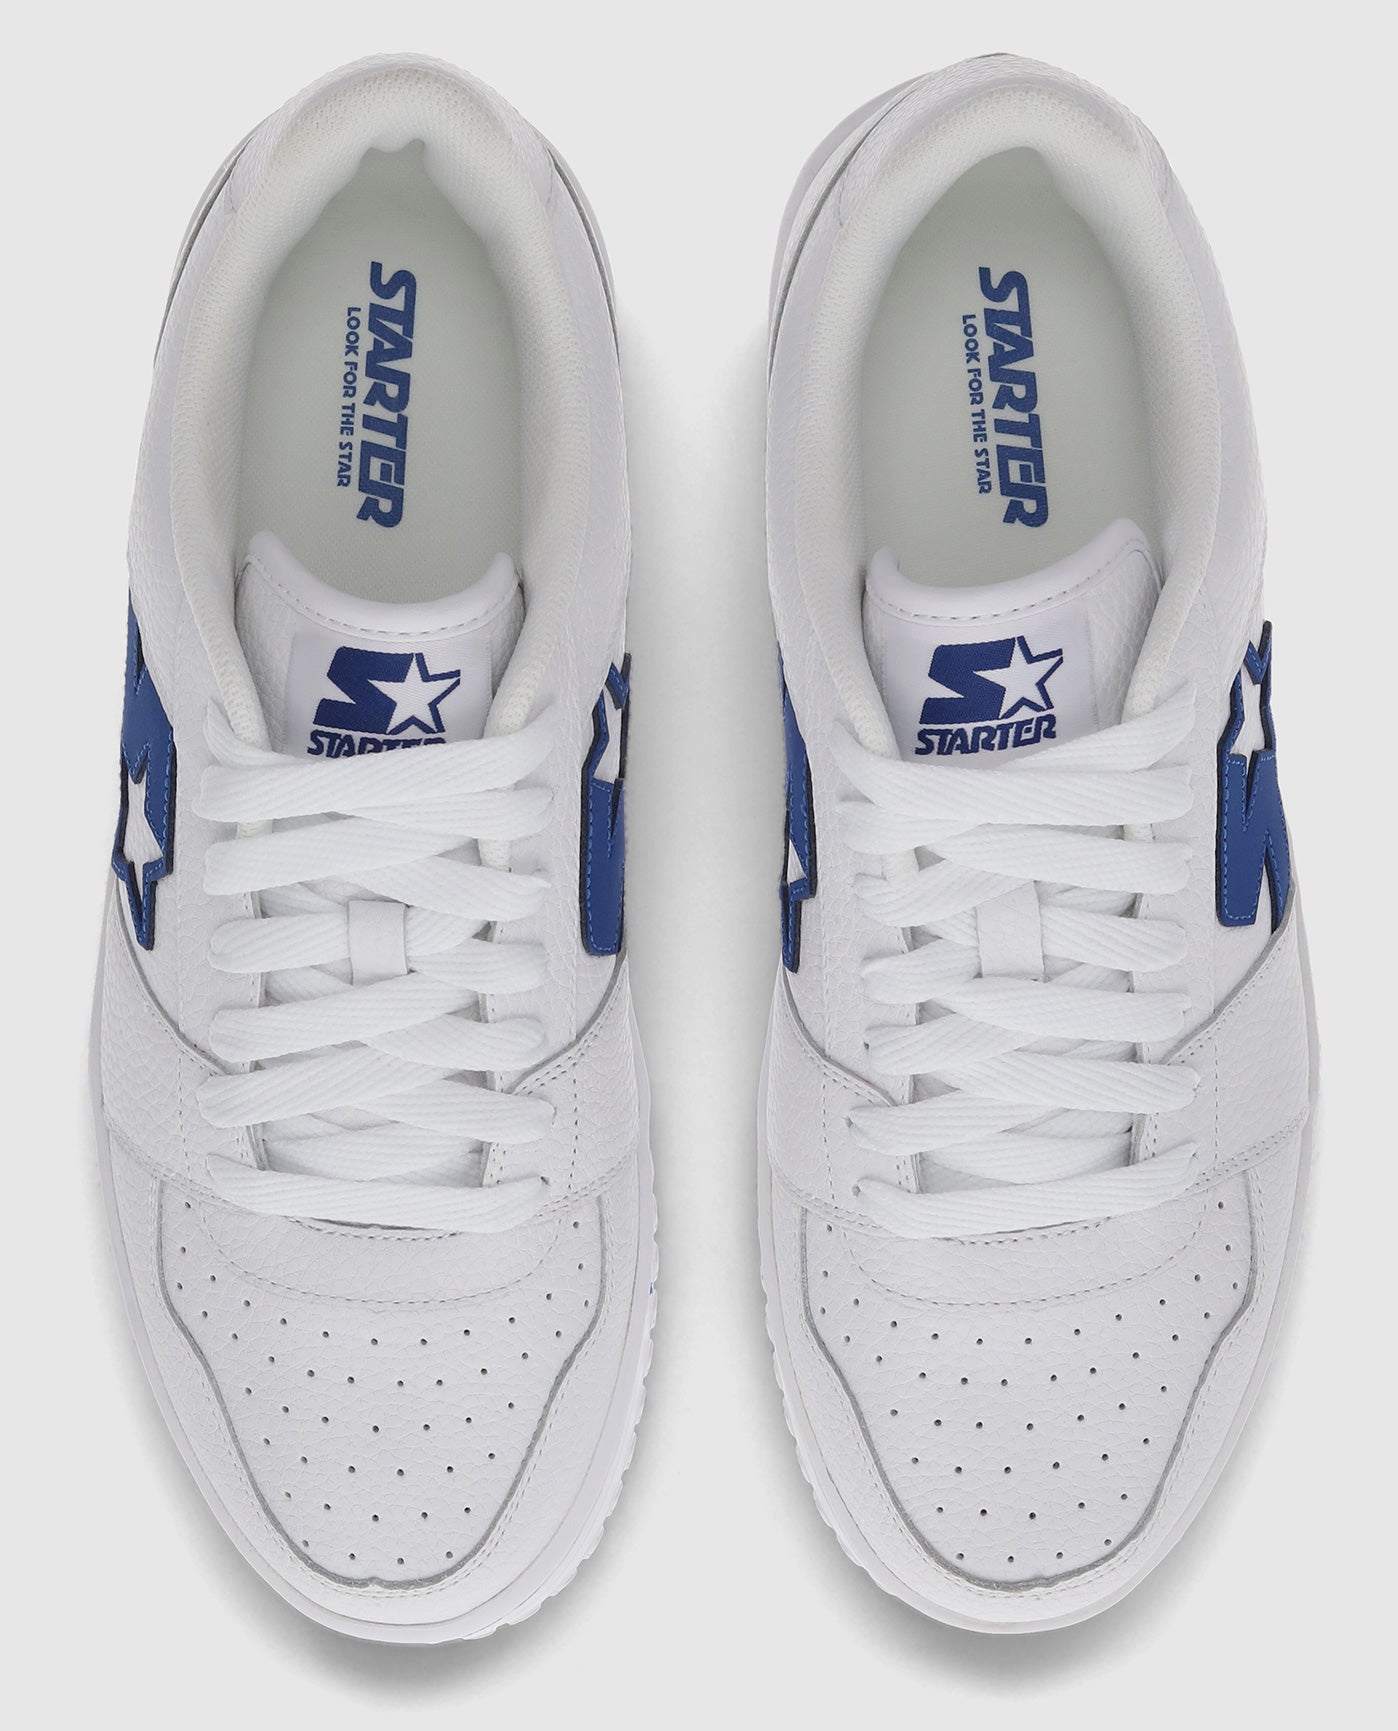 Top angle of Blue and White Starter LFS 1 Sneakers | Blue White